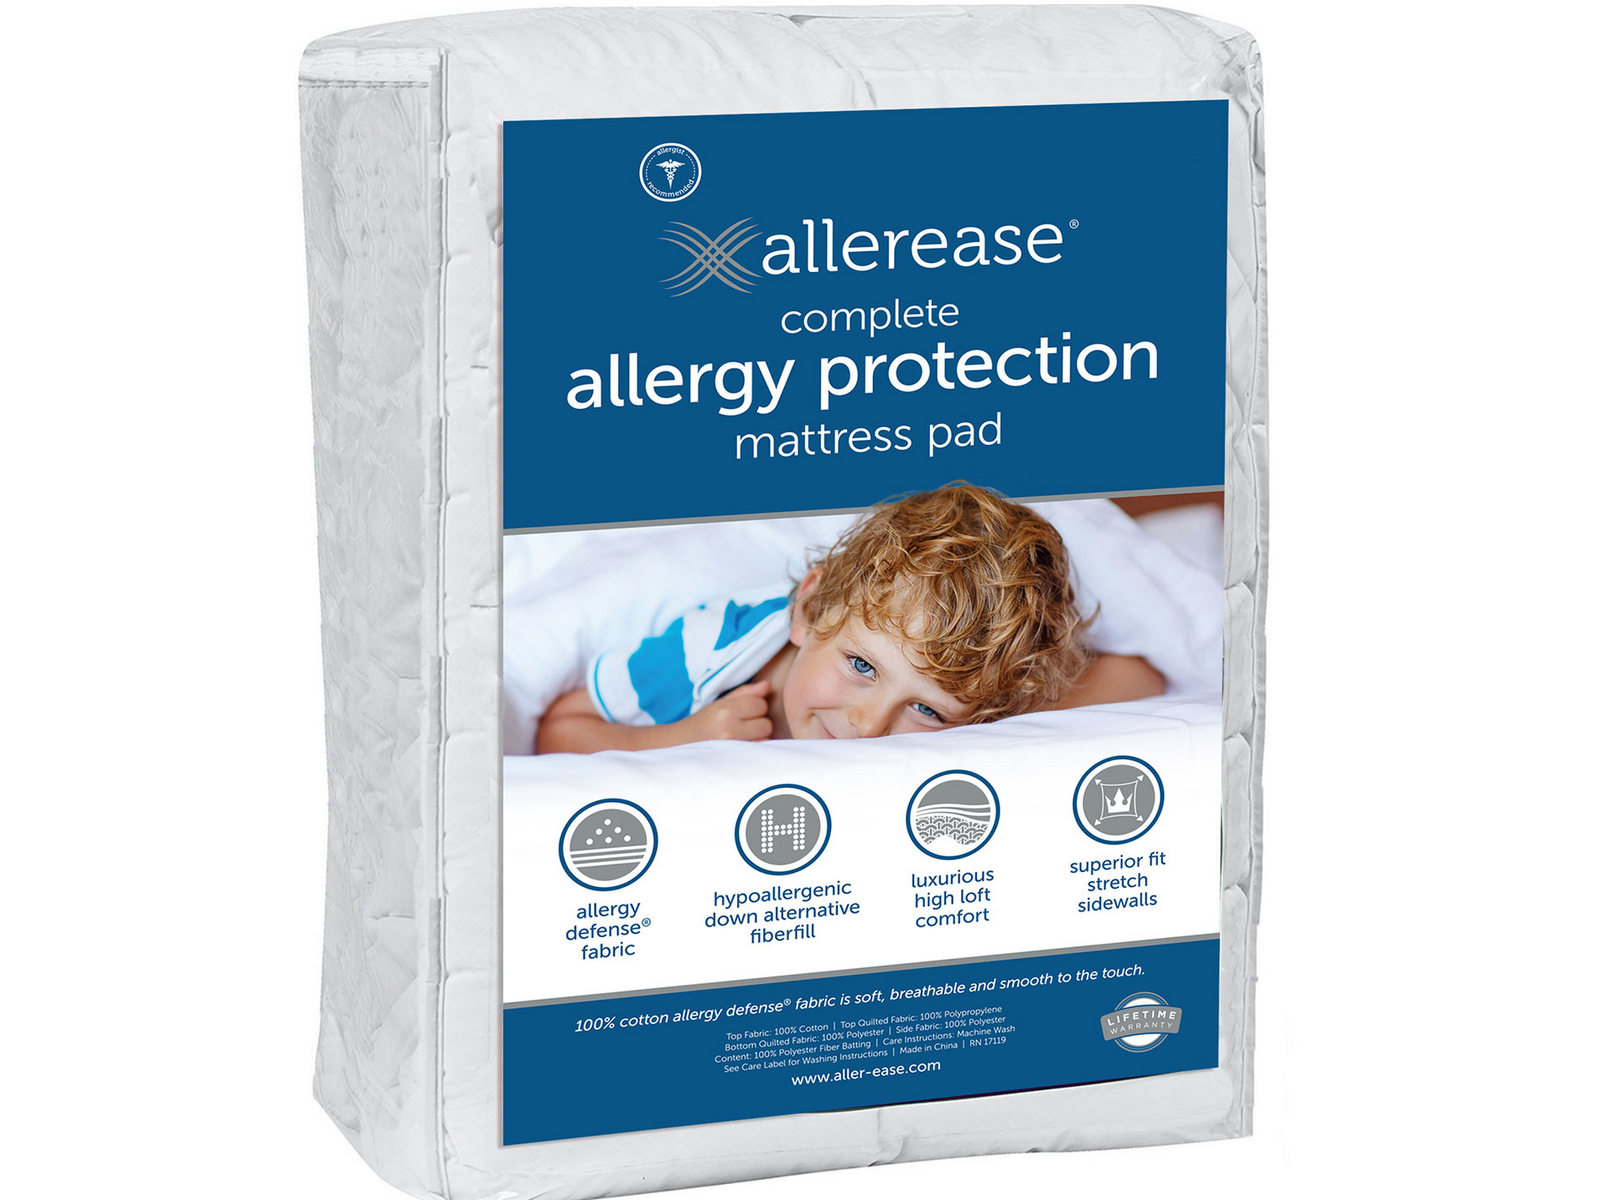 Allerease Full Complete Allergy Protection Mattress Pad